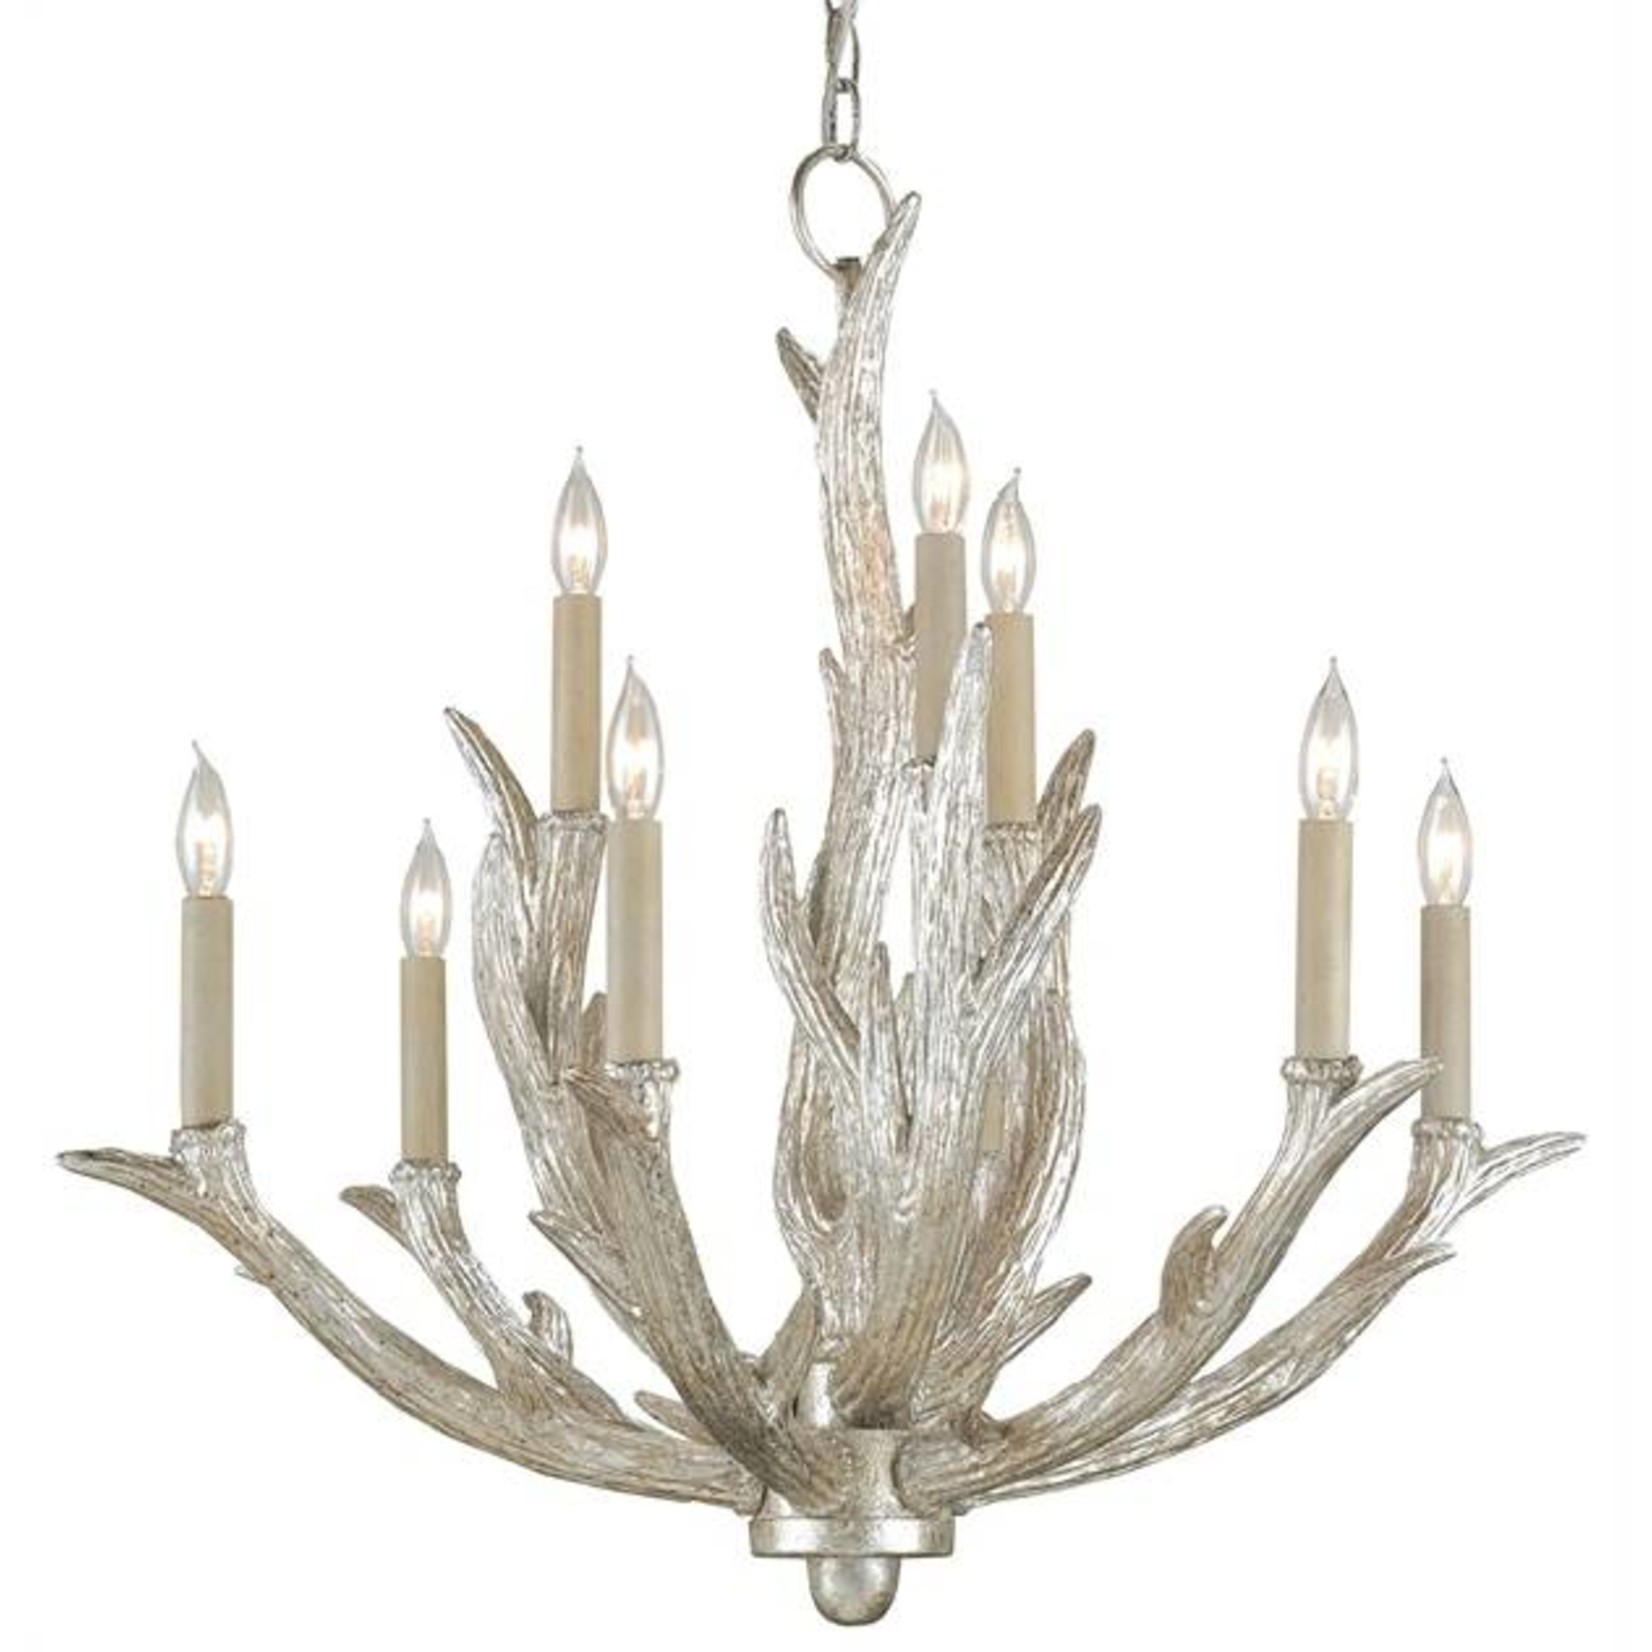 Currey and Company Haywood 9-Light Chandelier